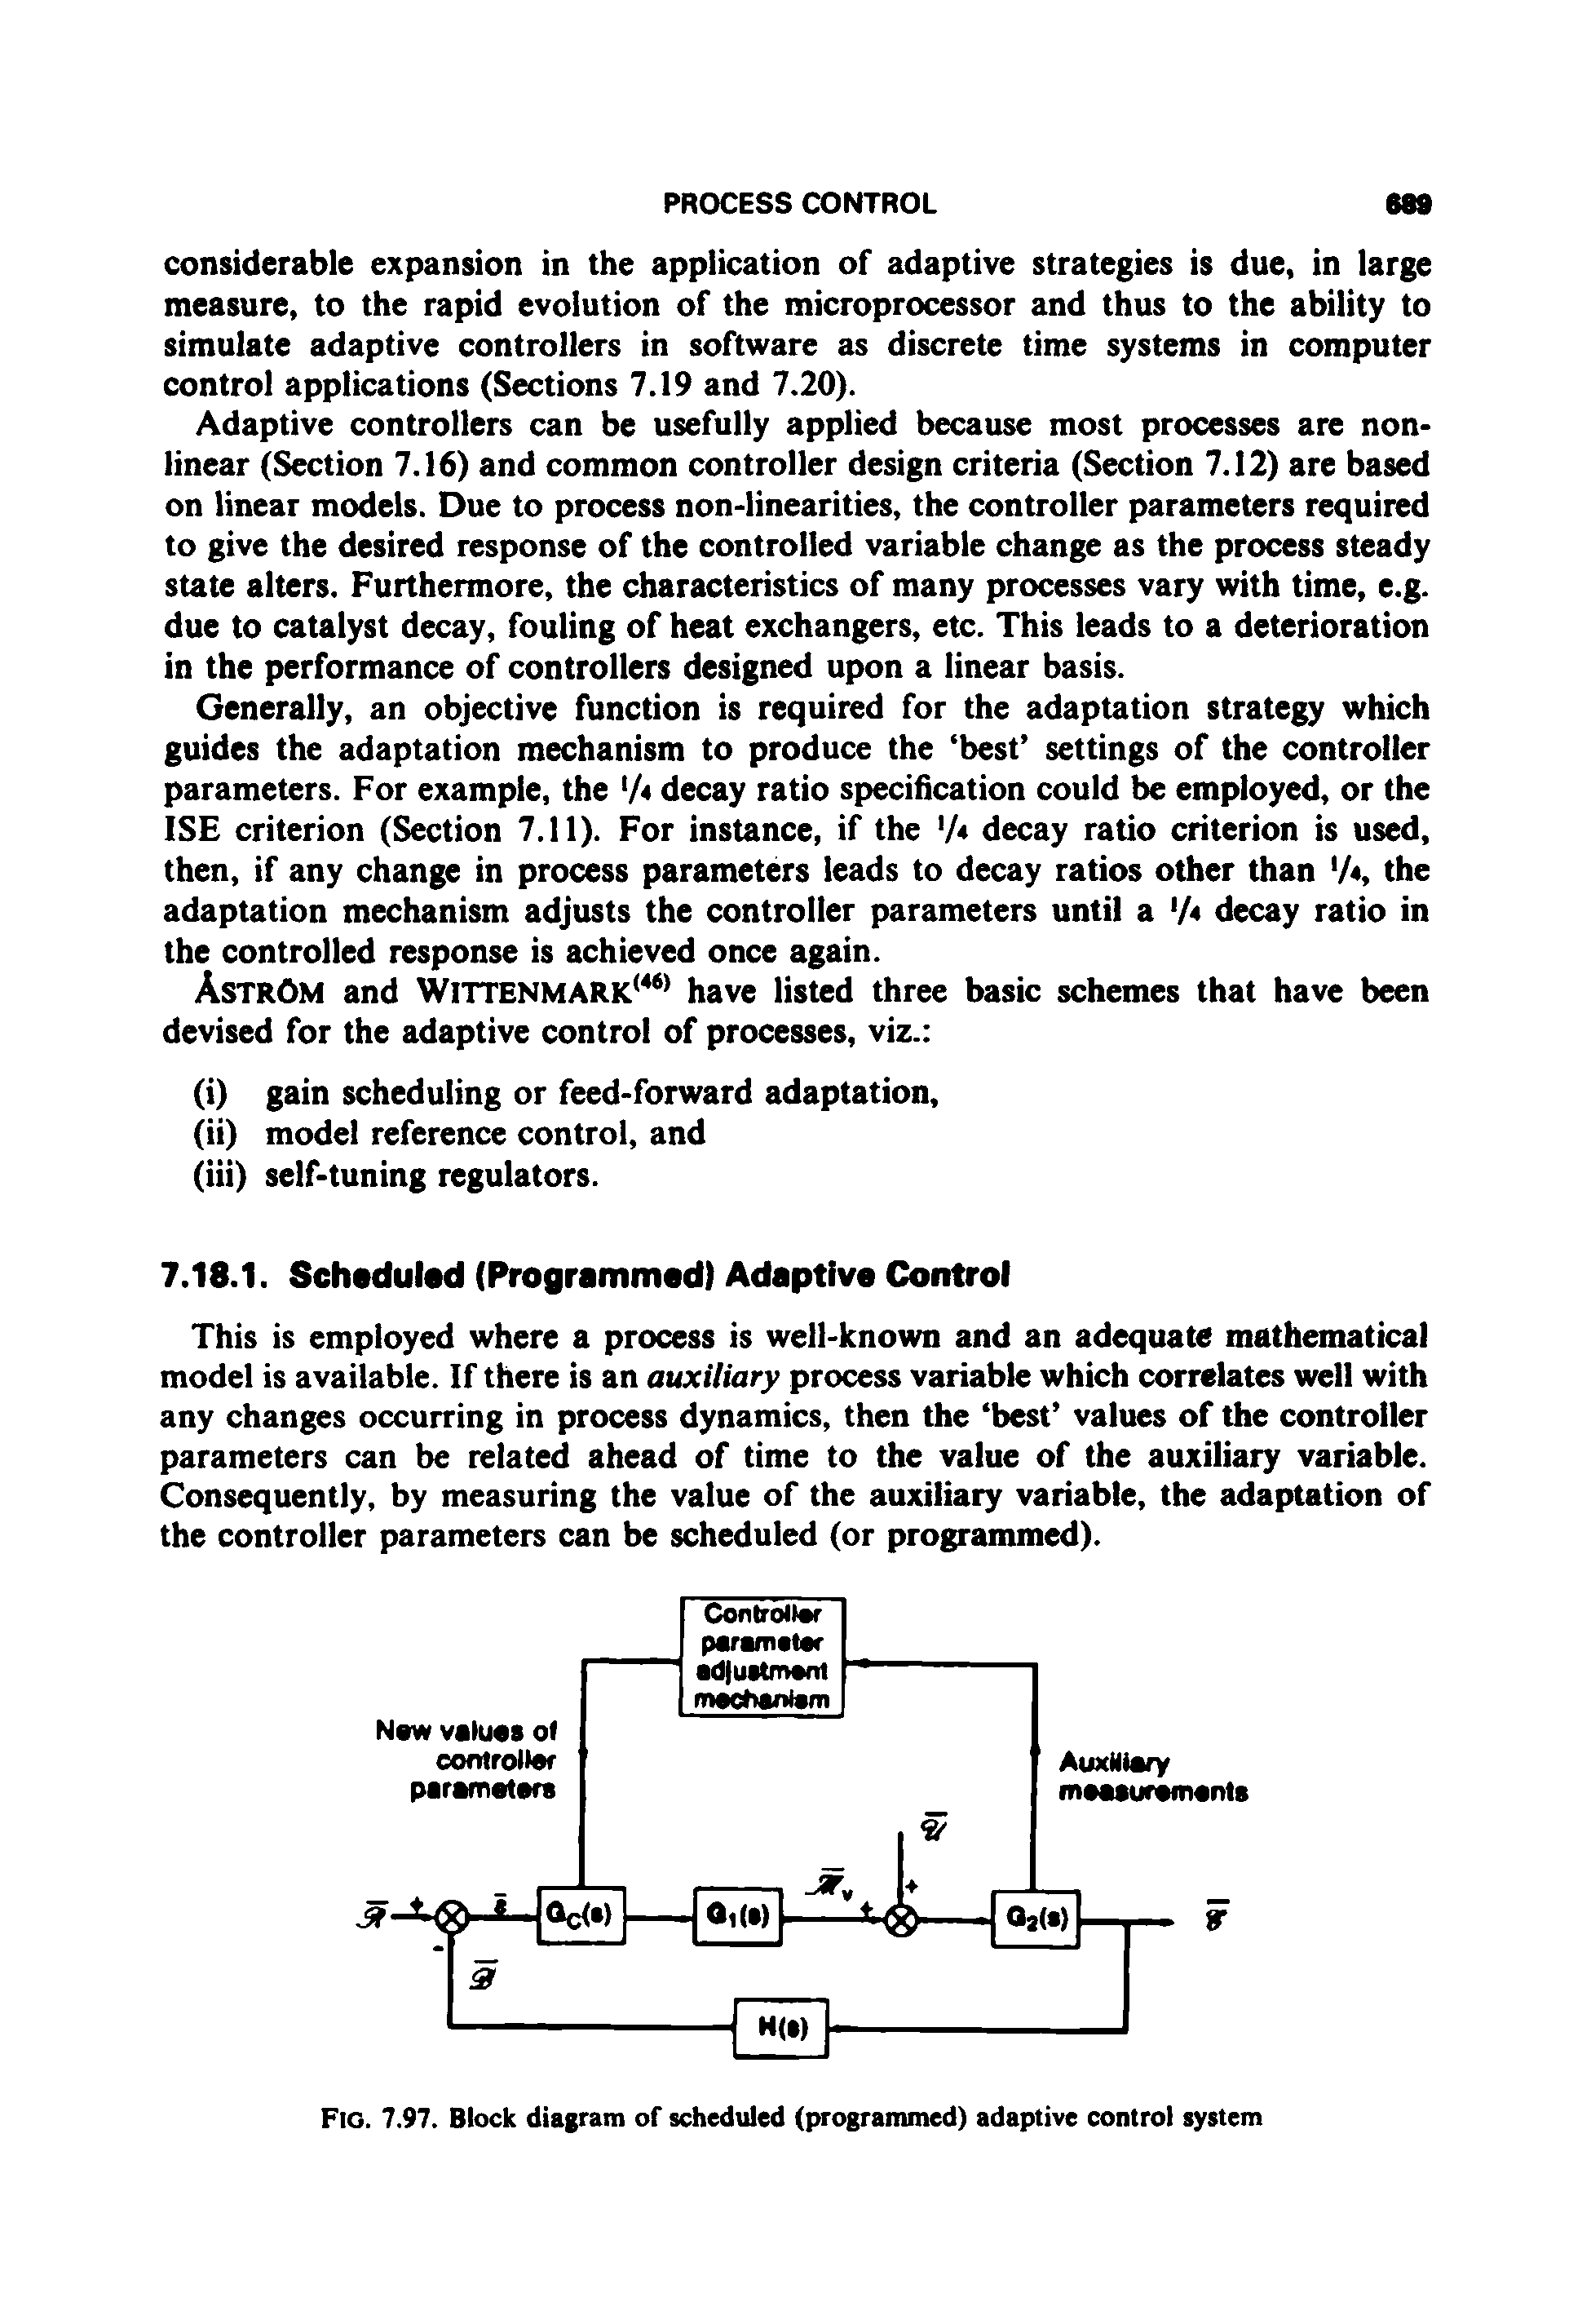 Fig. 7.97. Block diagram of scheduled (programmed) adaptive control system...